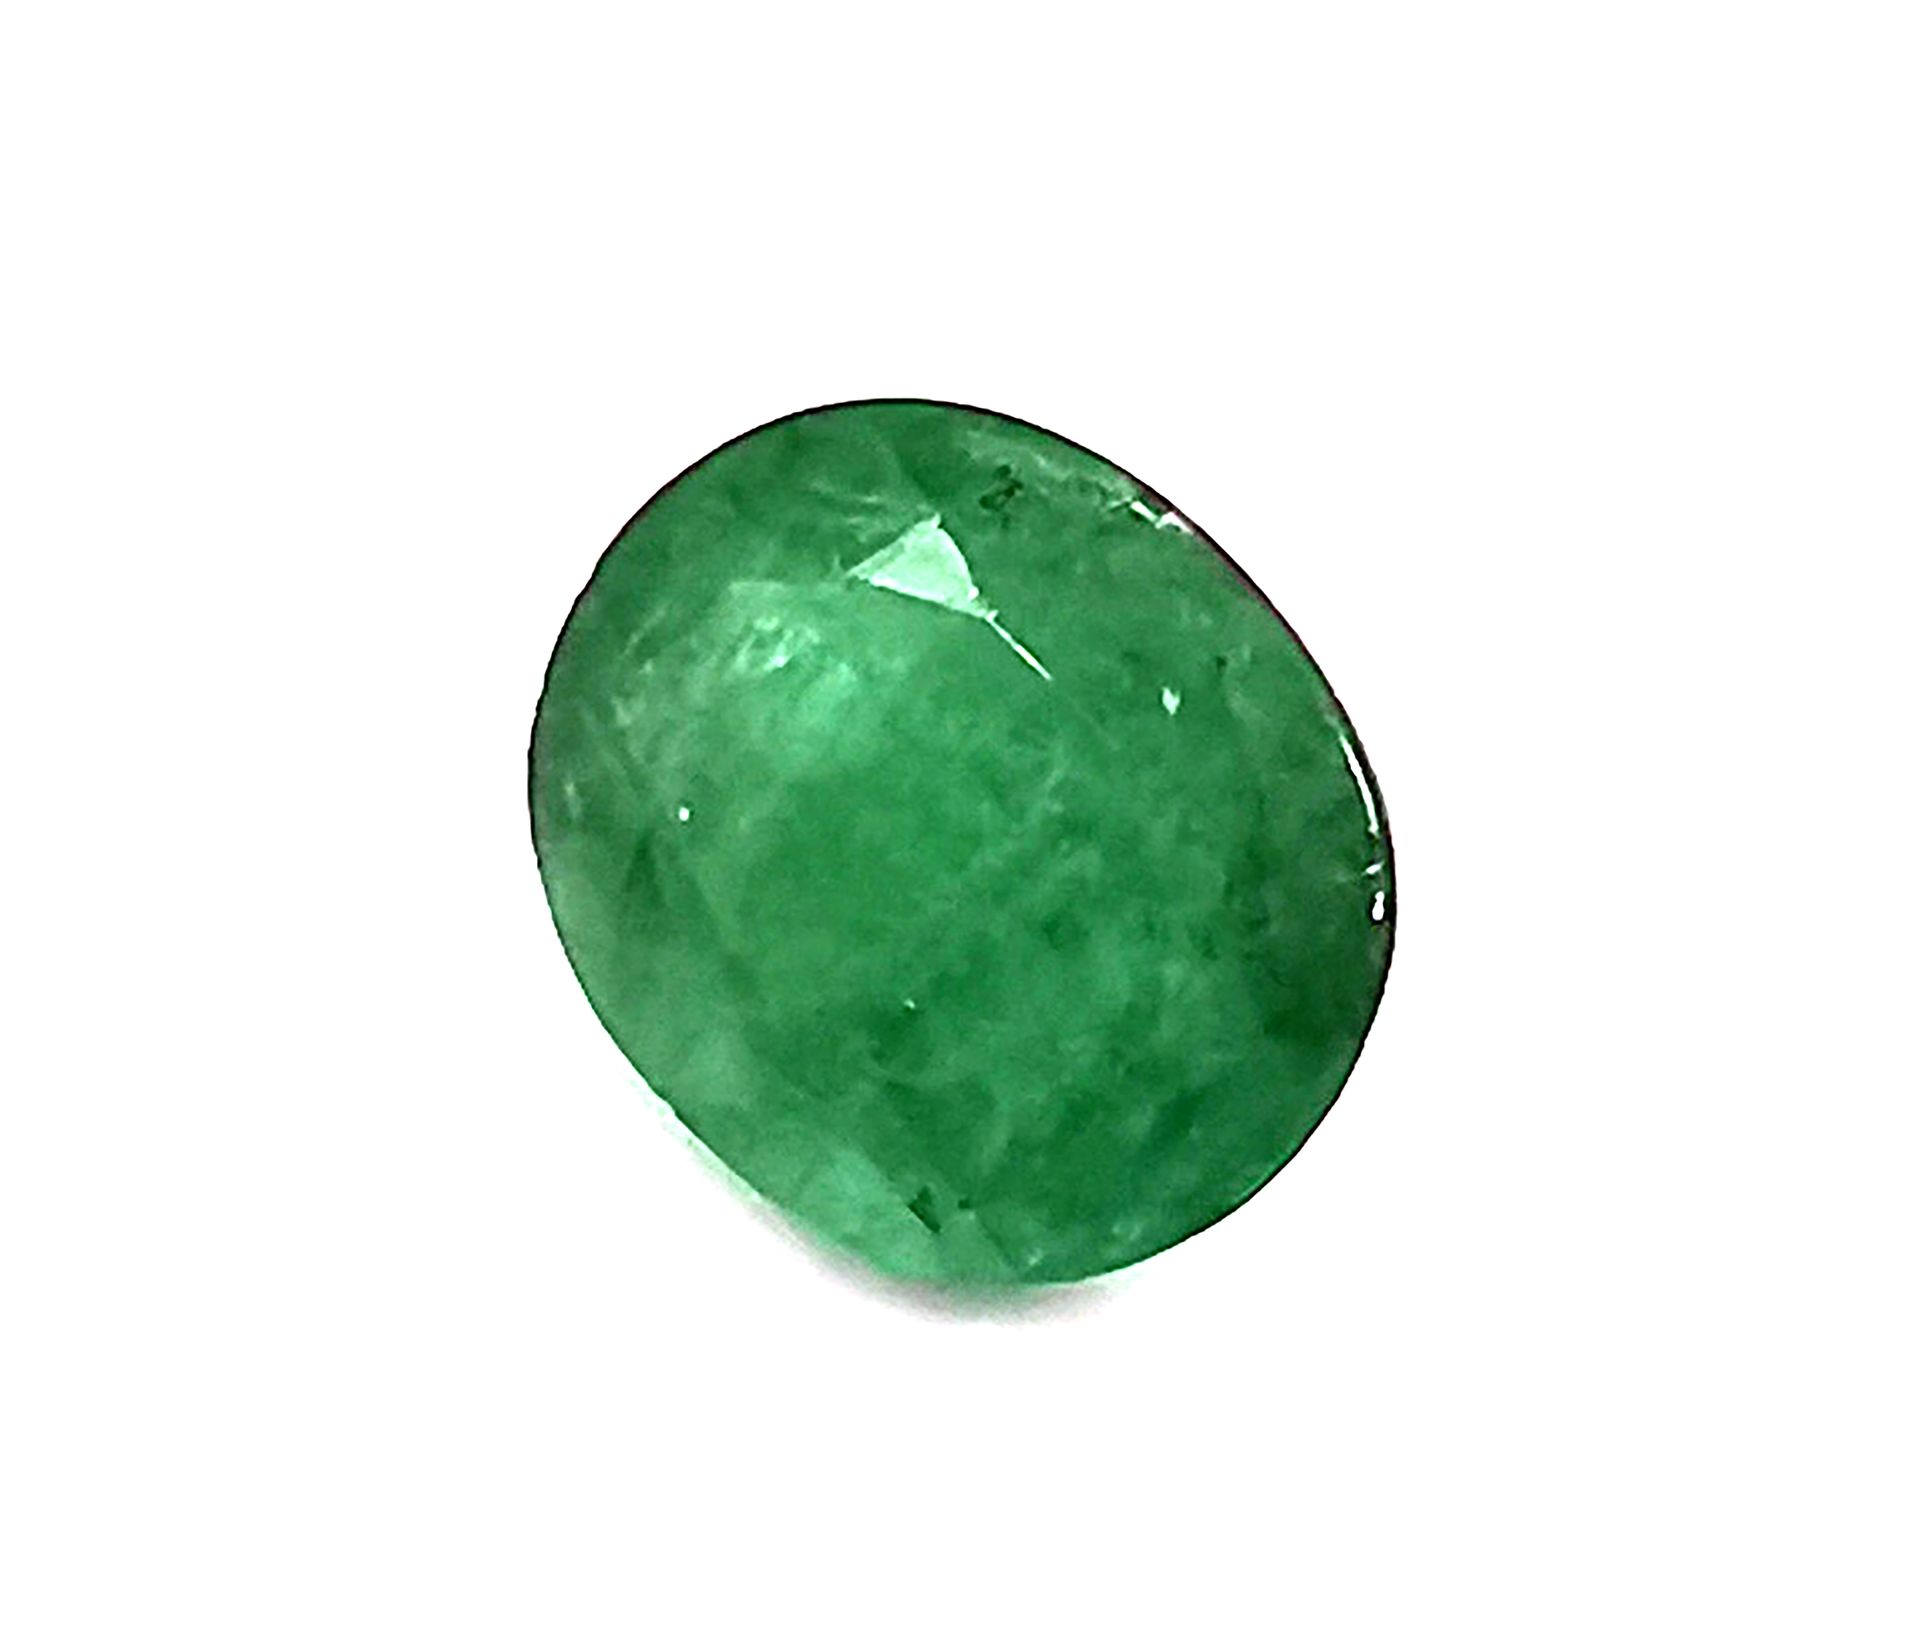 Null Brazilian Emerald on paper, oval faceted, weighing 7.23 carats

Accompanied&hellip;